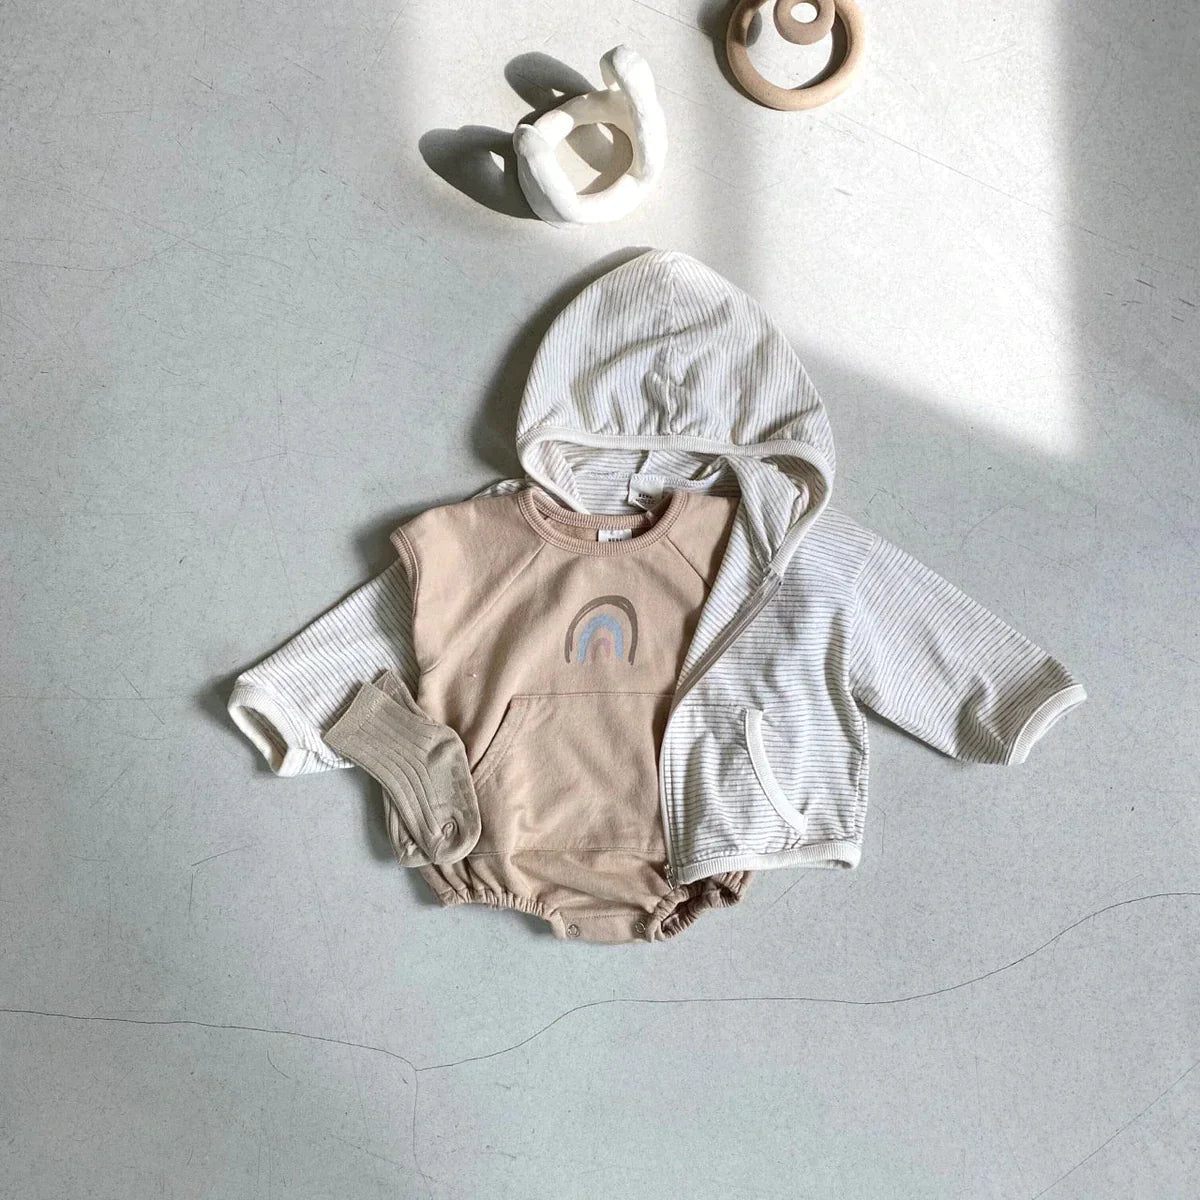 Summer Rainbow Bodysuit find Stylish Fashion for Little People- at Little Foxx Concept Store